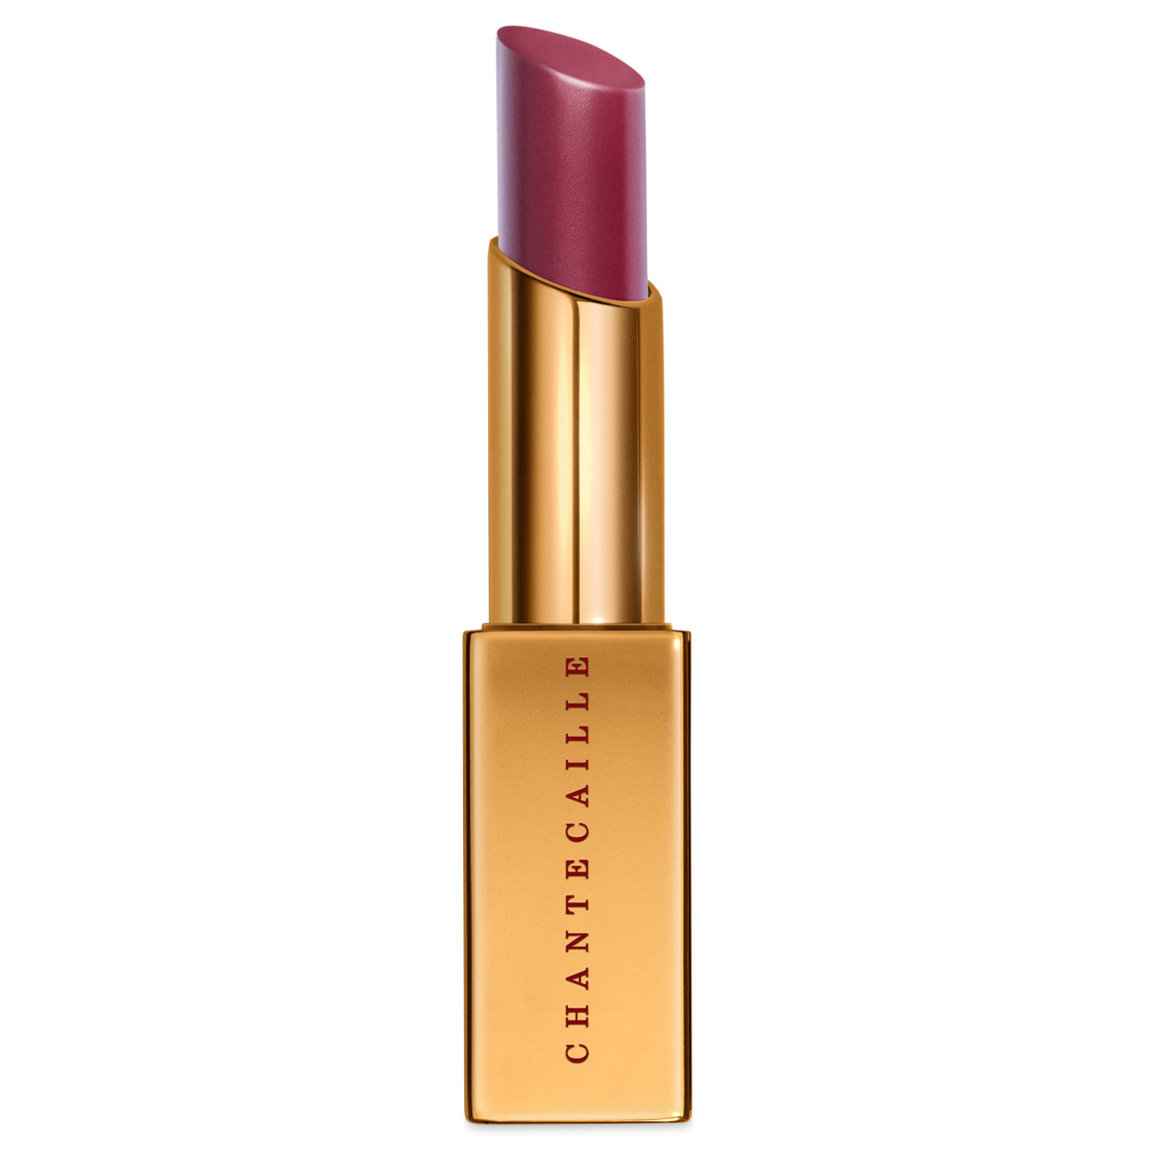 Chantecaille Lip Chic - Fall 2021 Collection Damask alternative view 1.